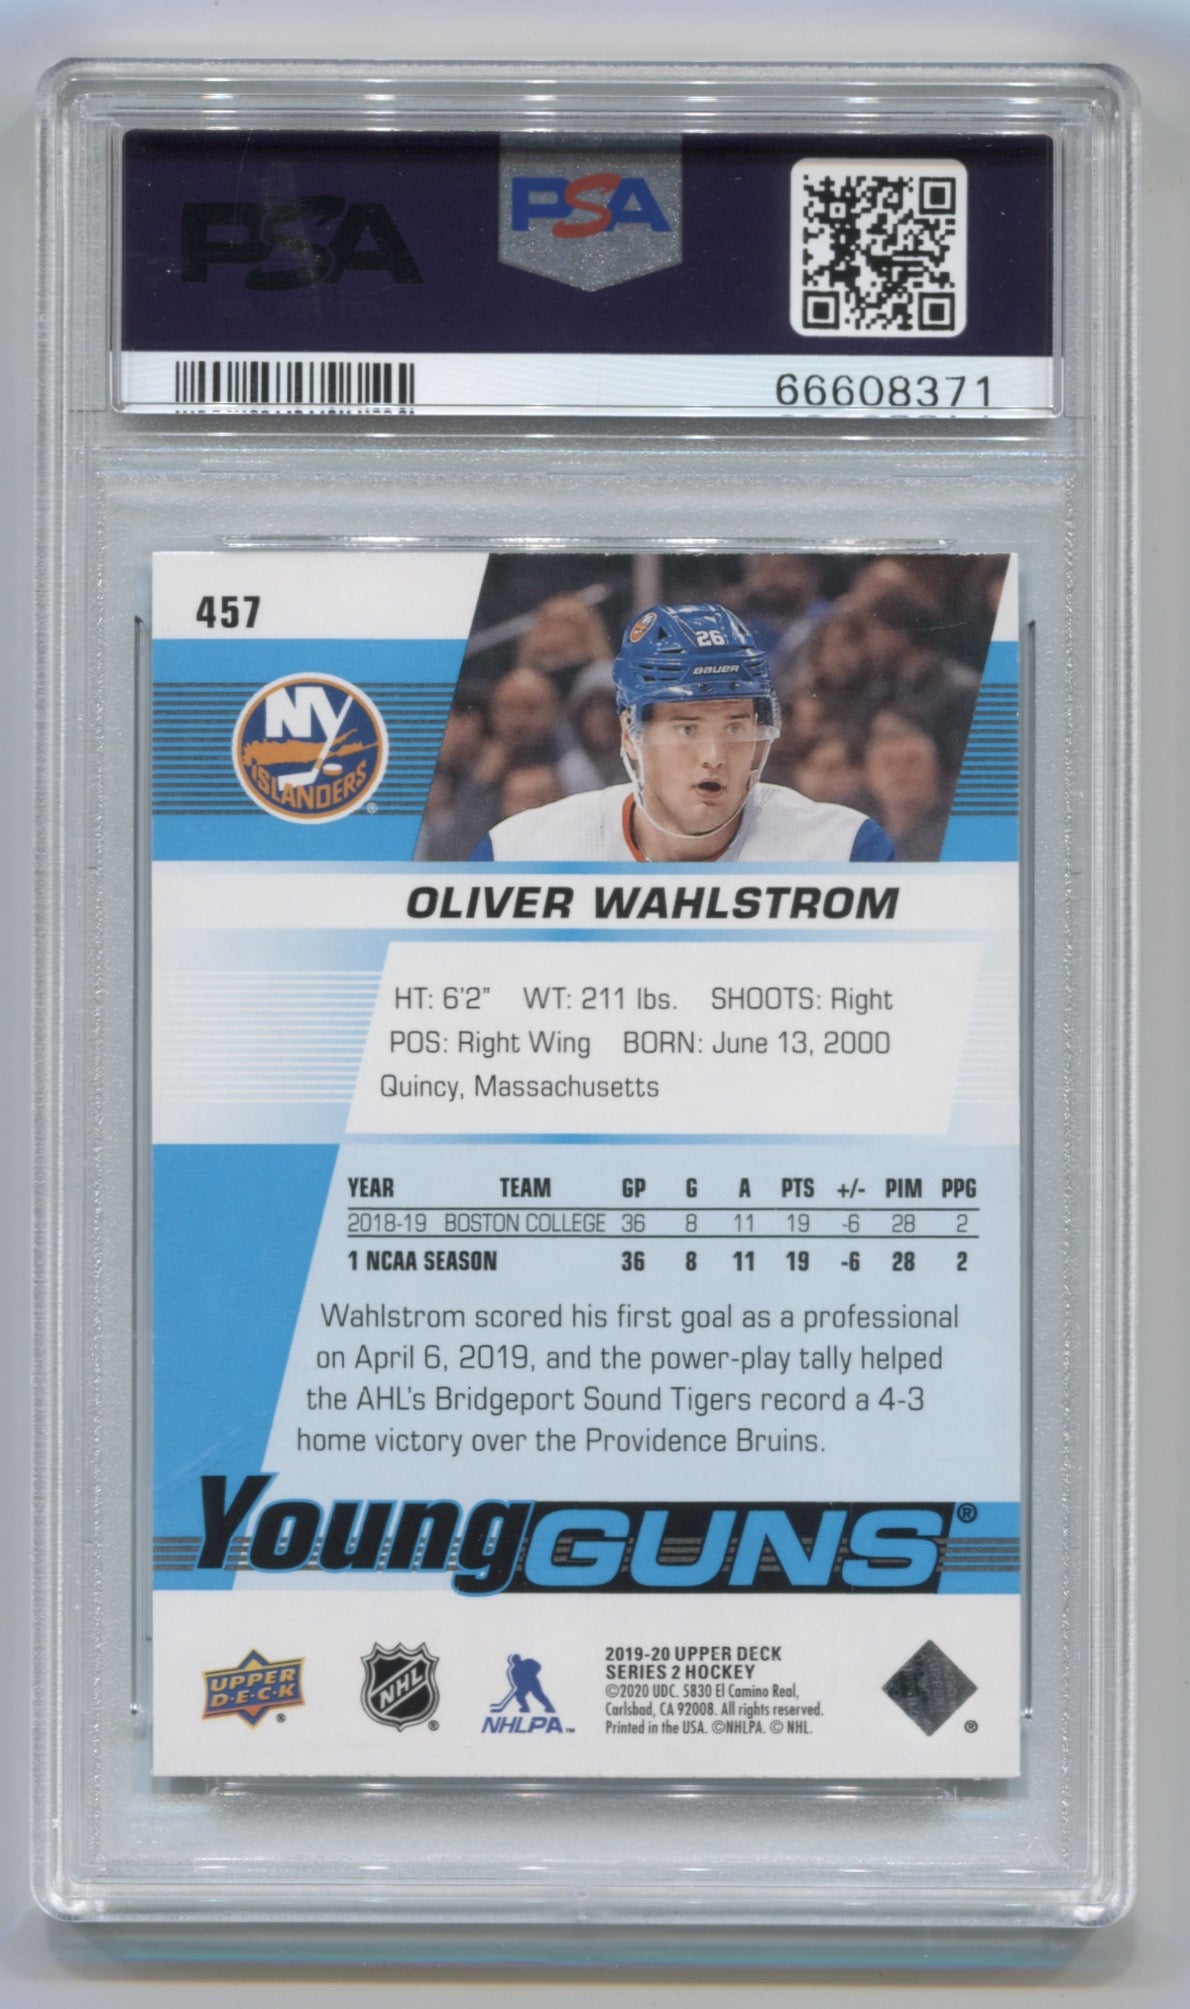 2019-20 Upper Deck #457 Oliver Wahlstrom PSA 9 (Rookie) | Eastridge Sports Cards